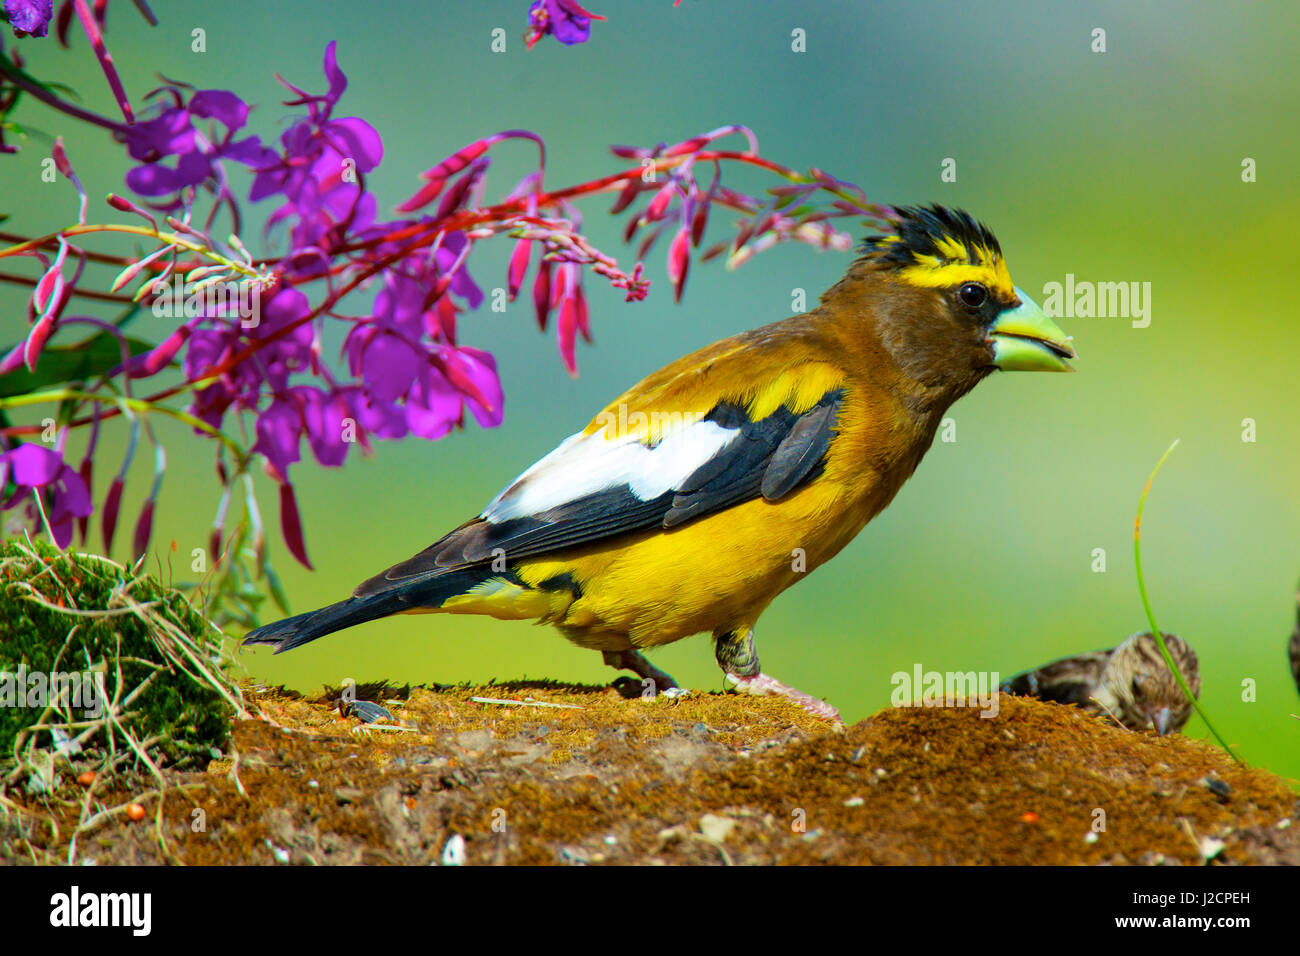 The evening grosbeak (Hesperiphona vespertina) is a passerine bird in the finch family Fringillidae. The breeding habitat is coniferous and mixed forest in Canada and the western mountainous areas of the United States. Stock Photo